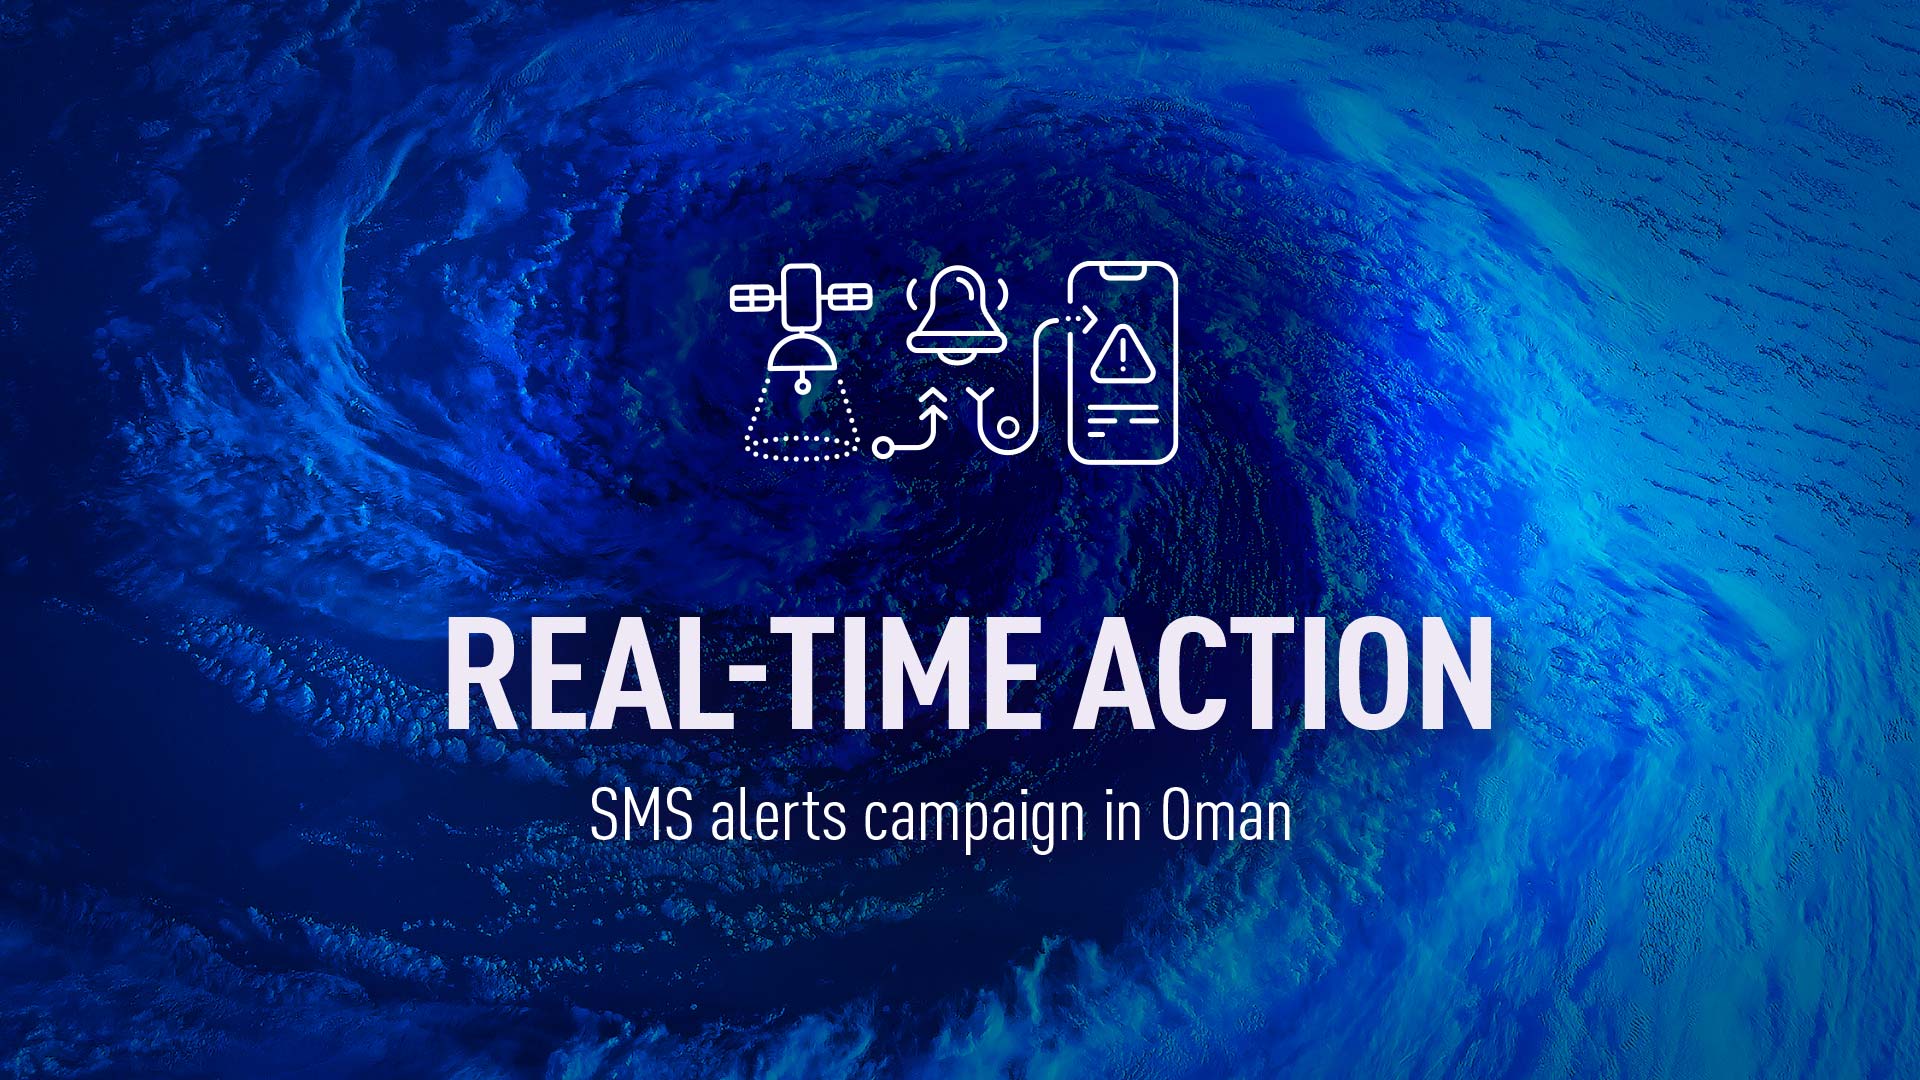 SMS alerts campaign in Oman